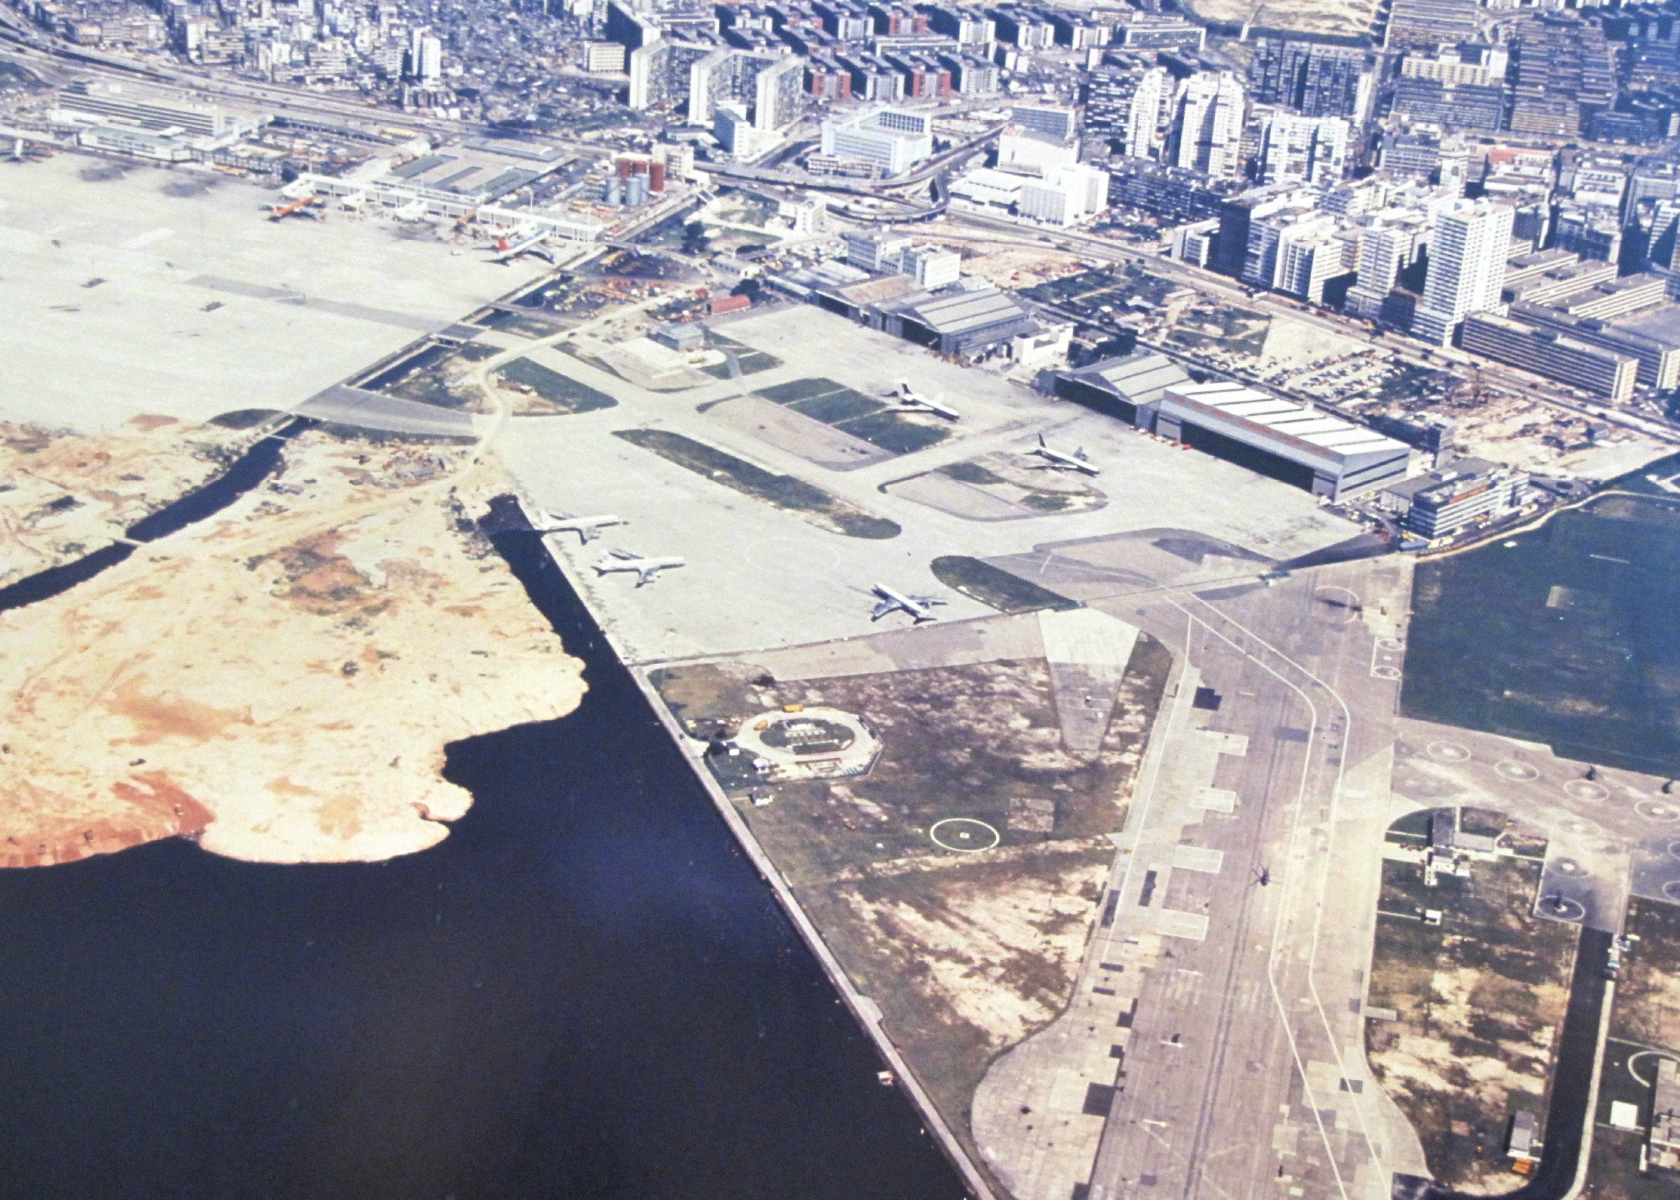 1970 Land Reclamation For Additional Cargo Area At Kai Tak